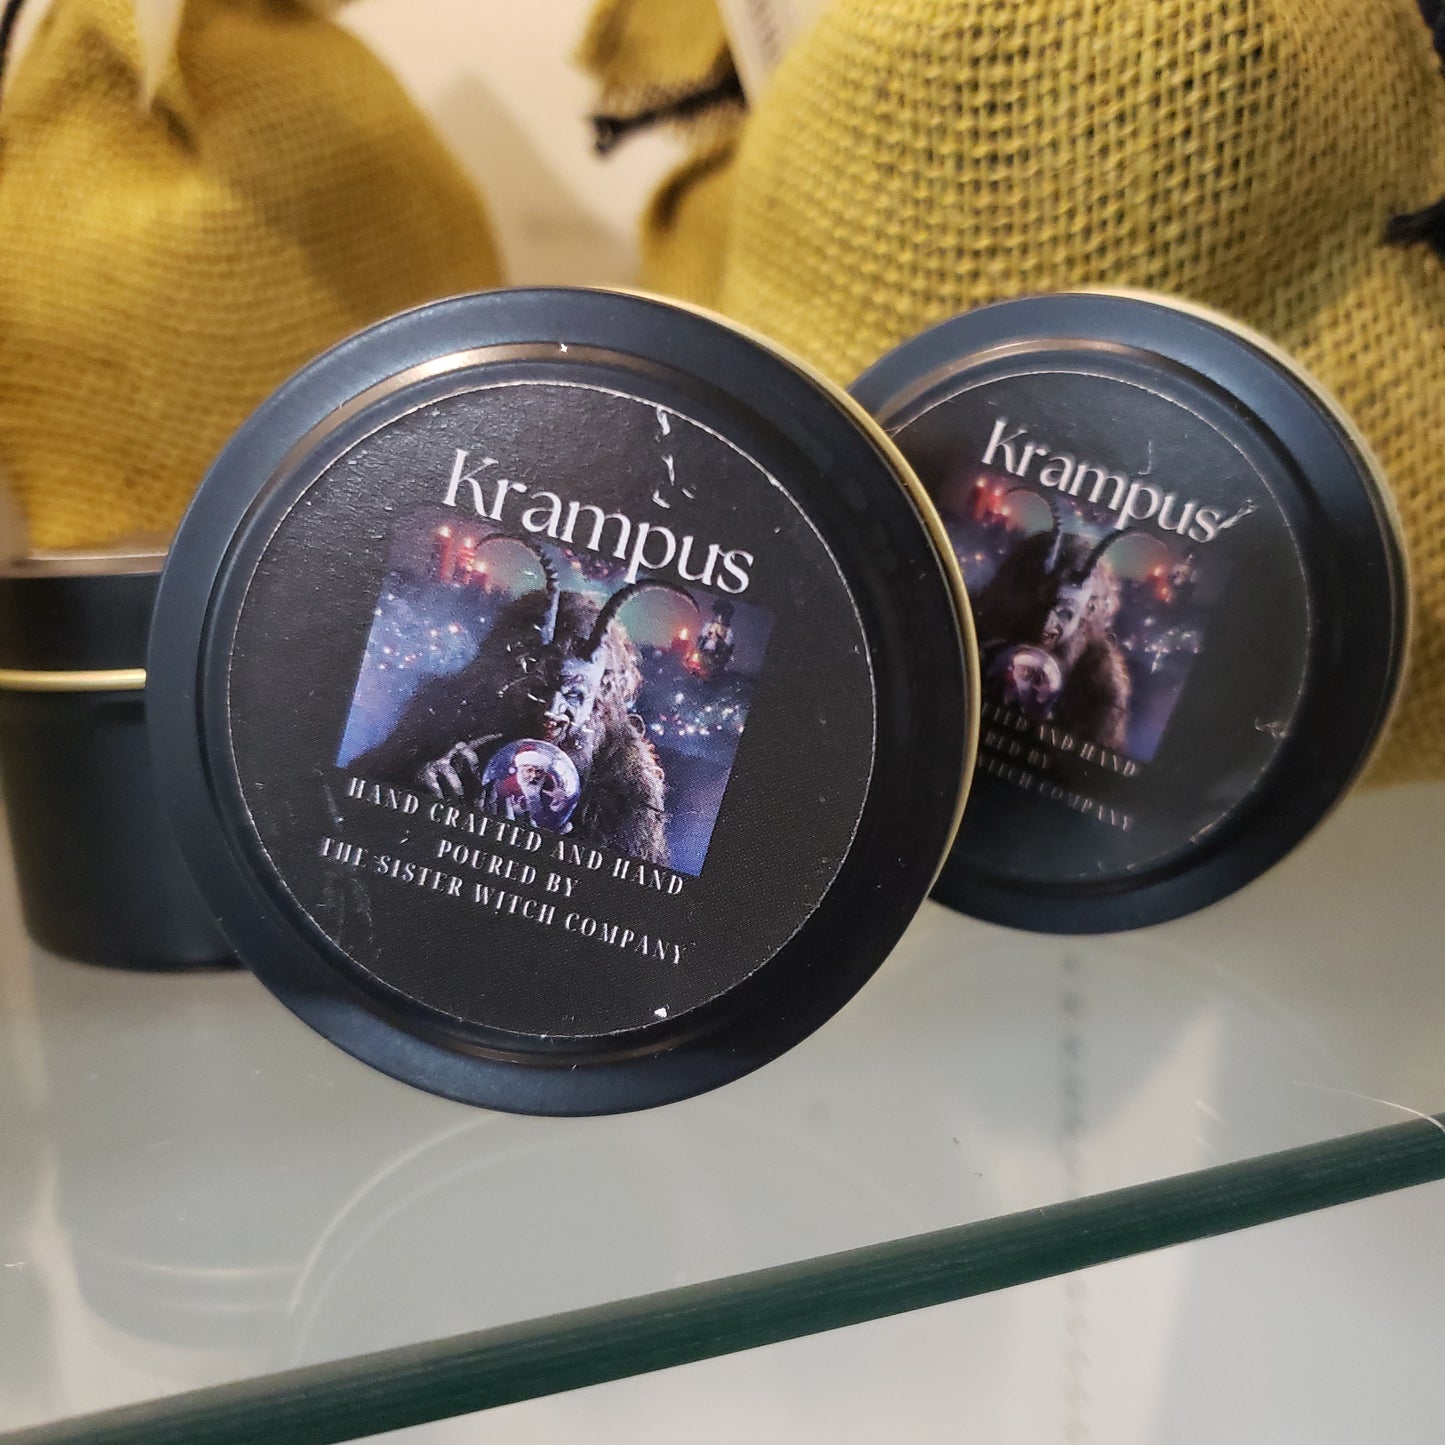 Krampus Candles Handmade by The Sister Witch Company